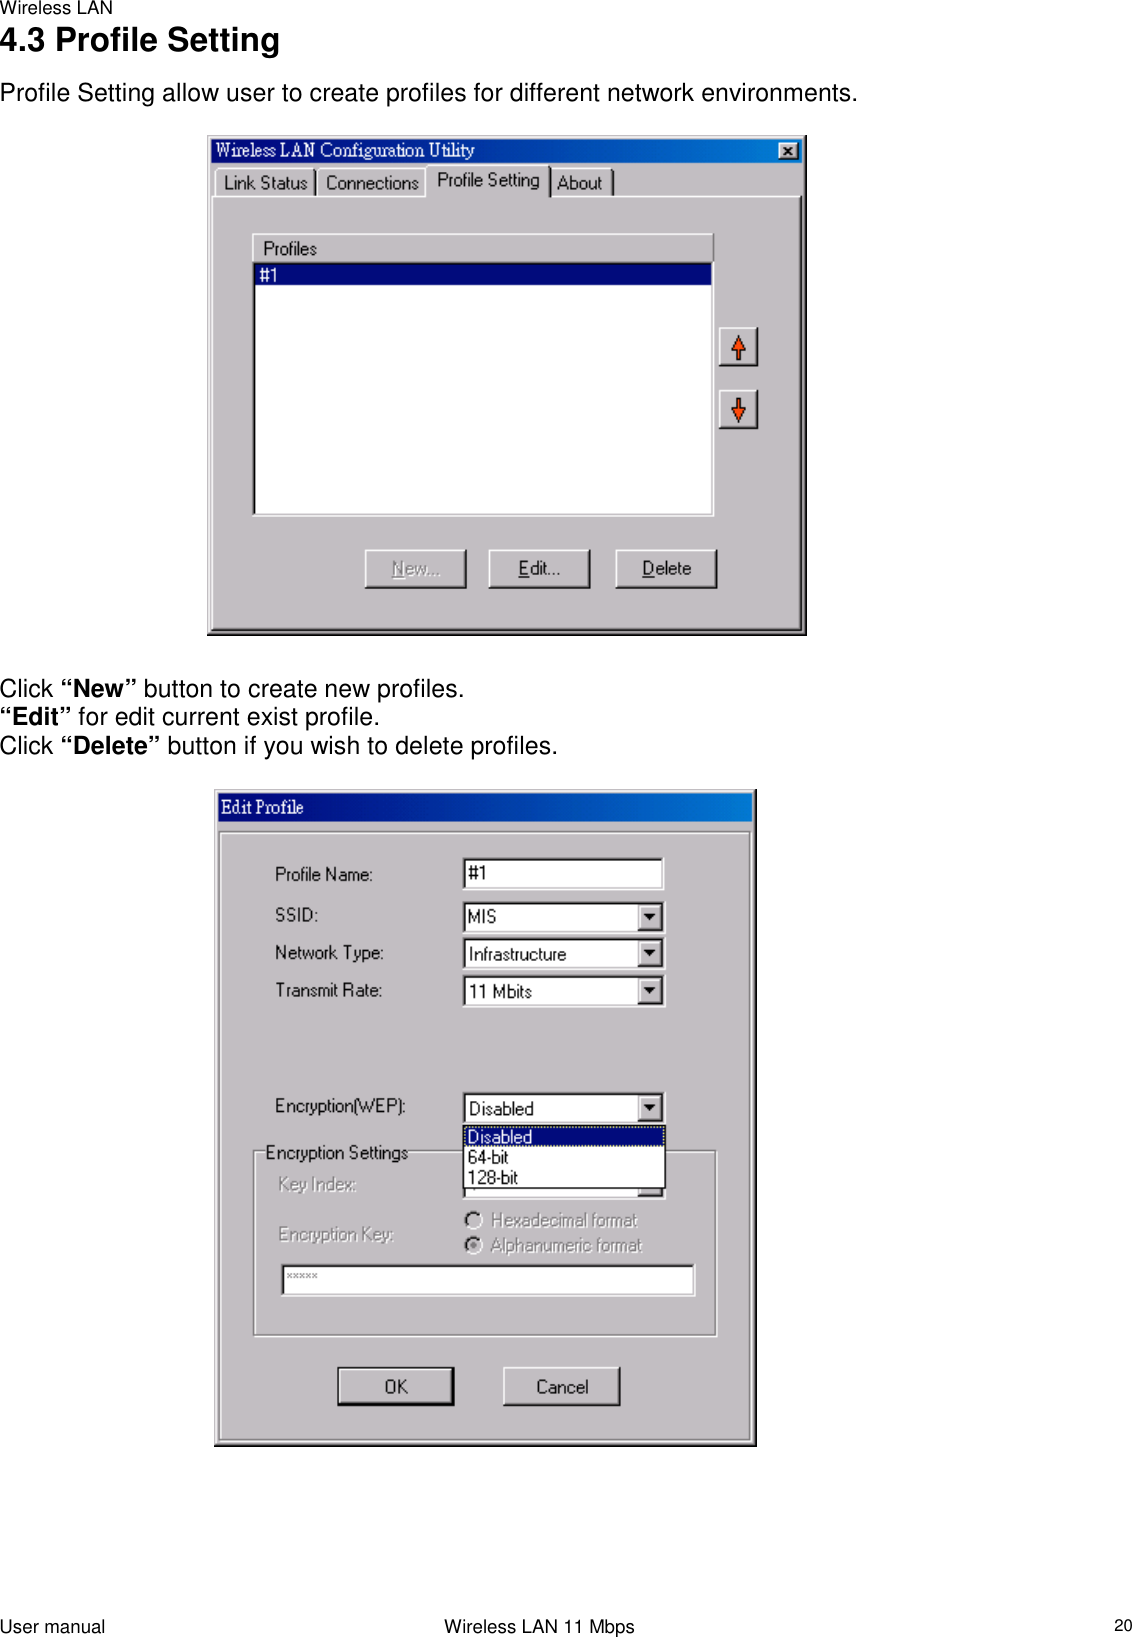 Wireless LANUser manual                                                                 Wireless LAN 11 Mbps204.3 Profile SettingProfile Setting allow user to create profiles for different network environments.                                Click “New” button to create new profiles.“Edit” for edit current exist profile.Click “Delete” button if you wish to delete profiles.                                     